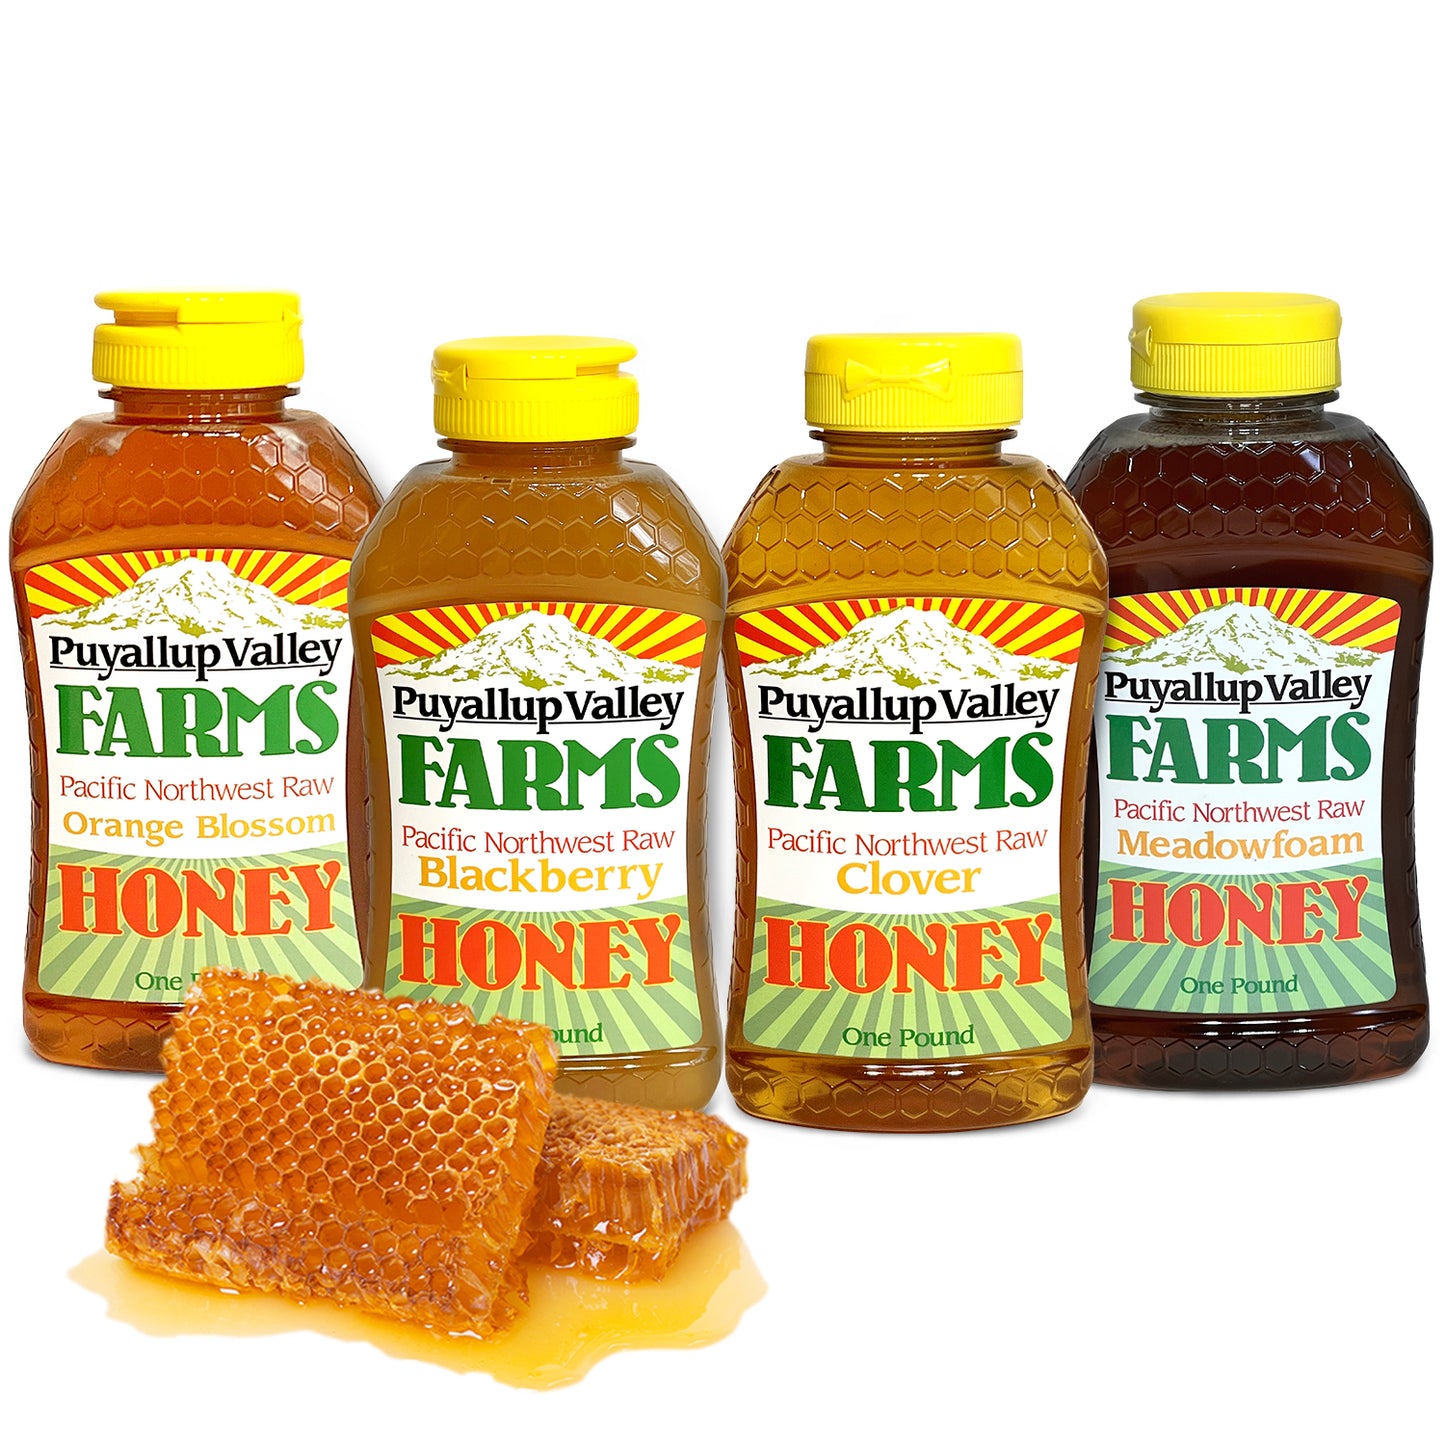 A Honey Gift Box by Puyallup Valley Farms | All-Natural Sweetener | No Additives | Non-Pasteurized Organic Raw Honey | Raw Honey Comes in 4-1lb Squeeze Bottles | Gift Box Include Four Different Flavors | Free Shipping 64 Oz.